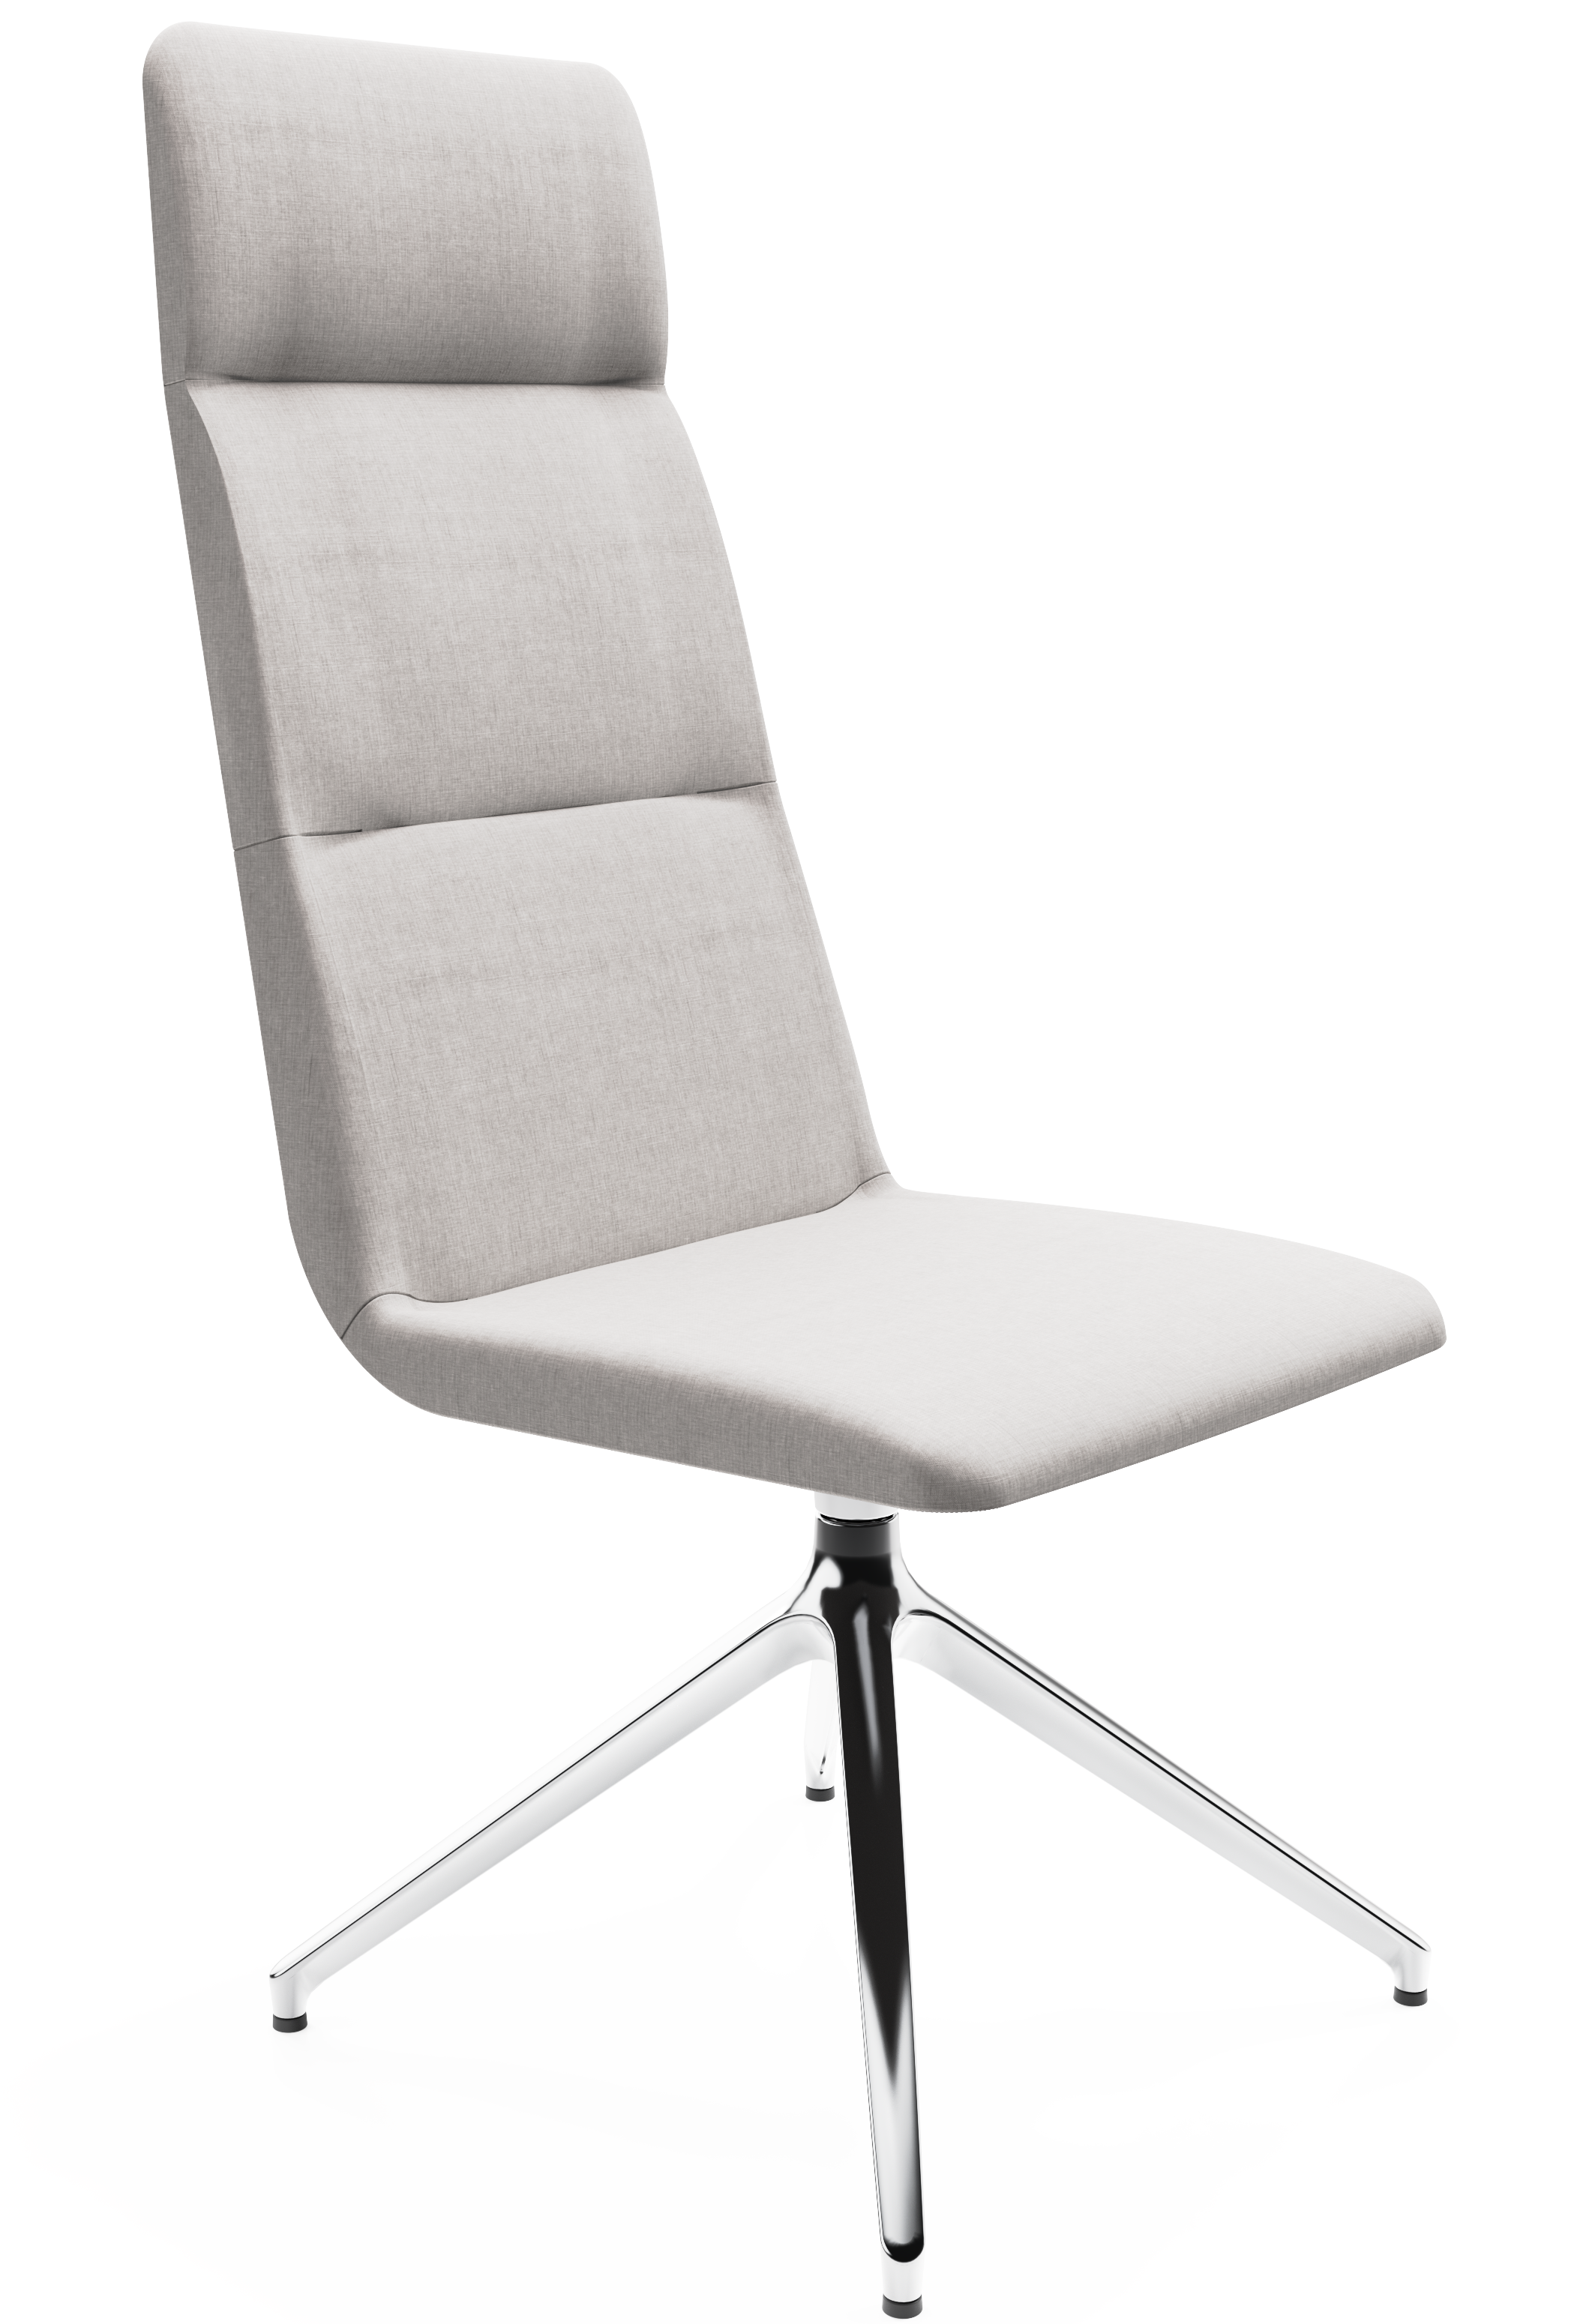 WS - Accord high 4 star base chair - chrome - remix 126 - front angle1